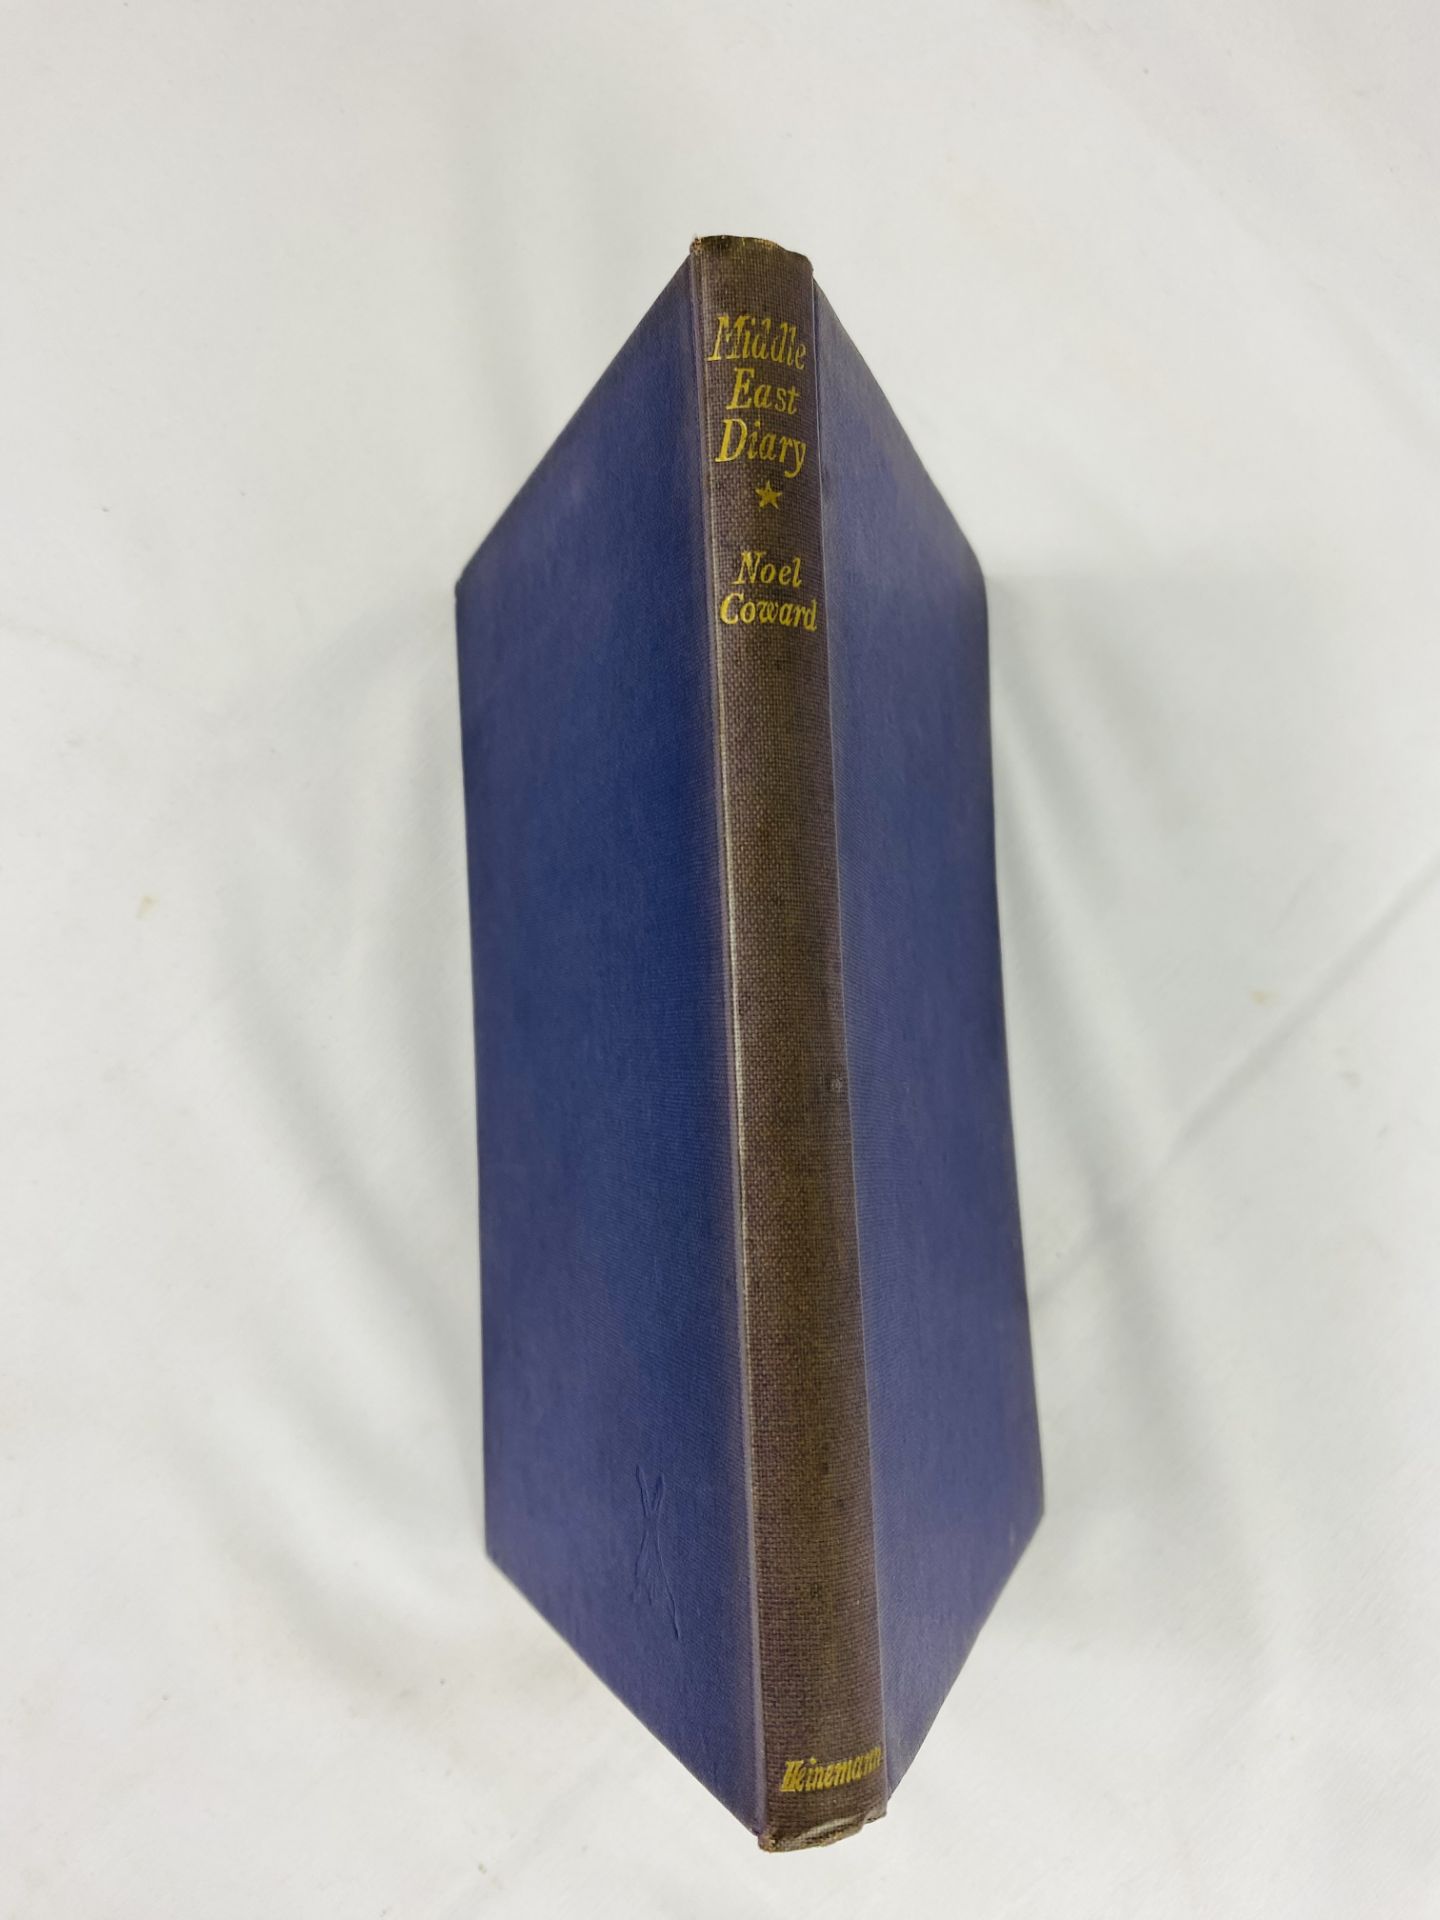 Noel Coward, Middle East Diary, first edition, William Heinemann Ltd, 1944 - Image 2 of 7